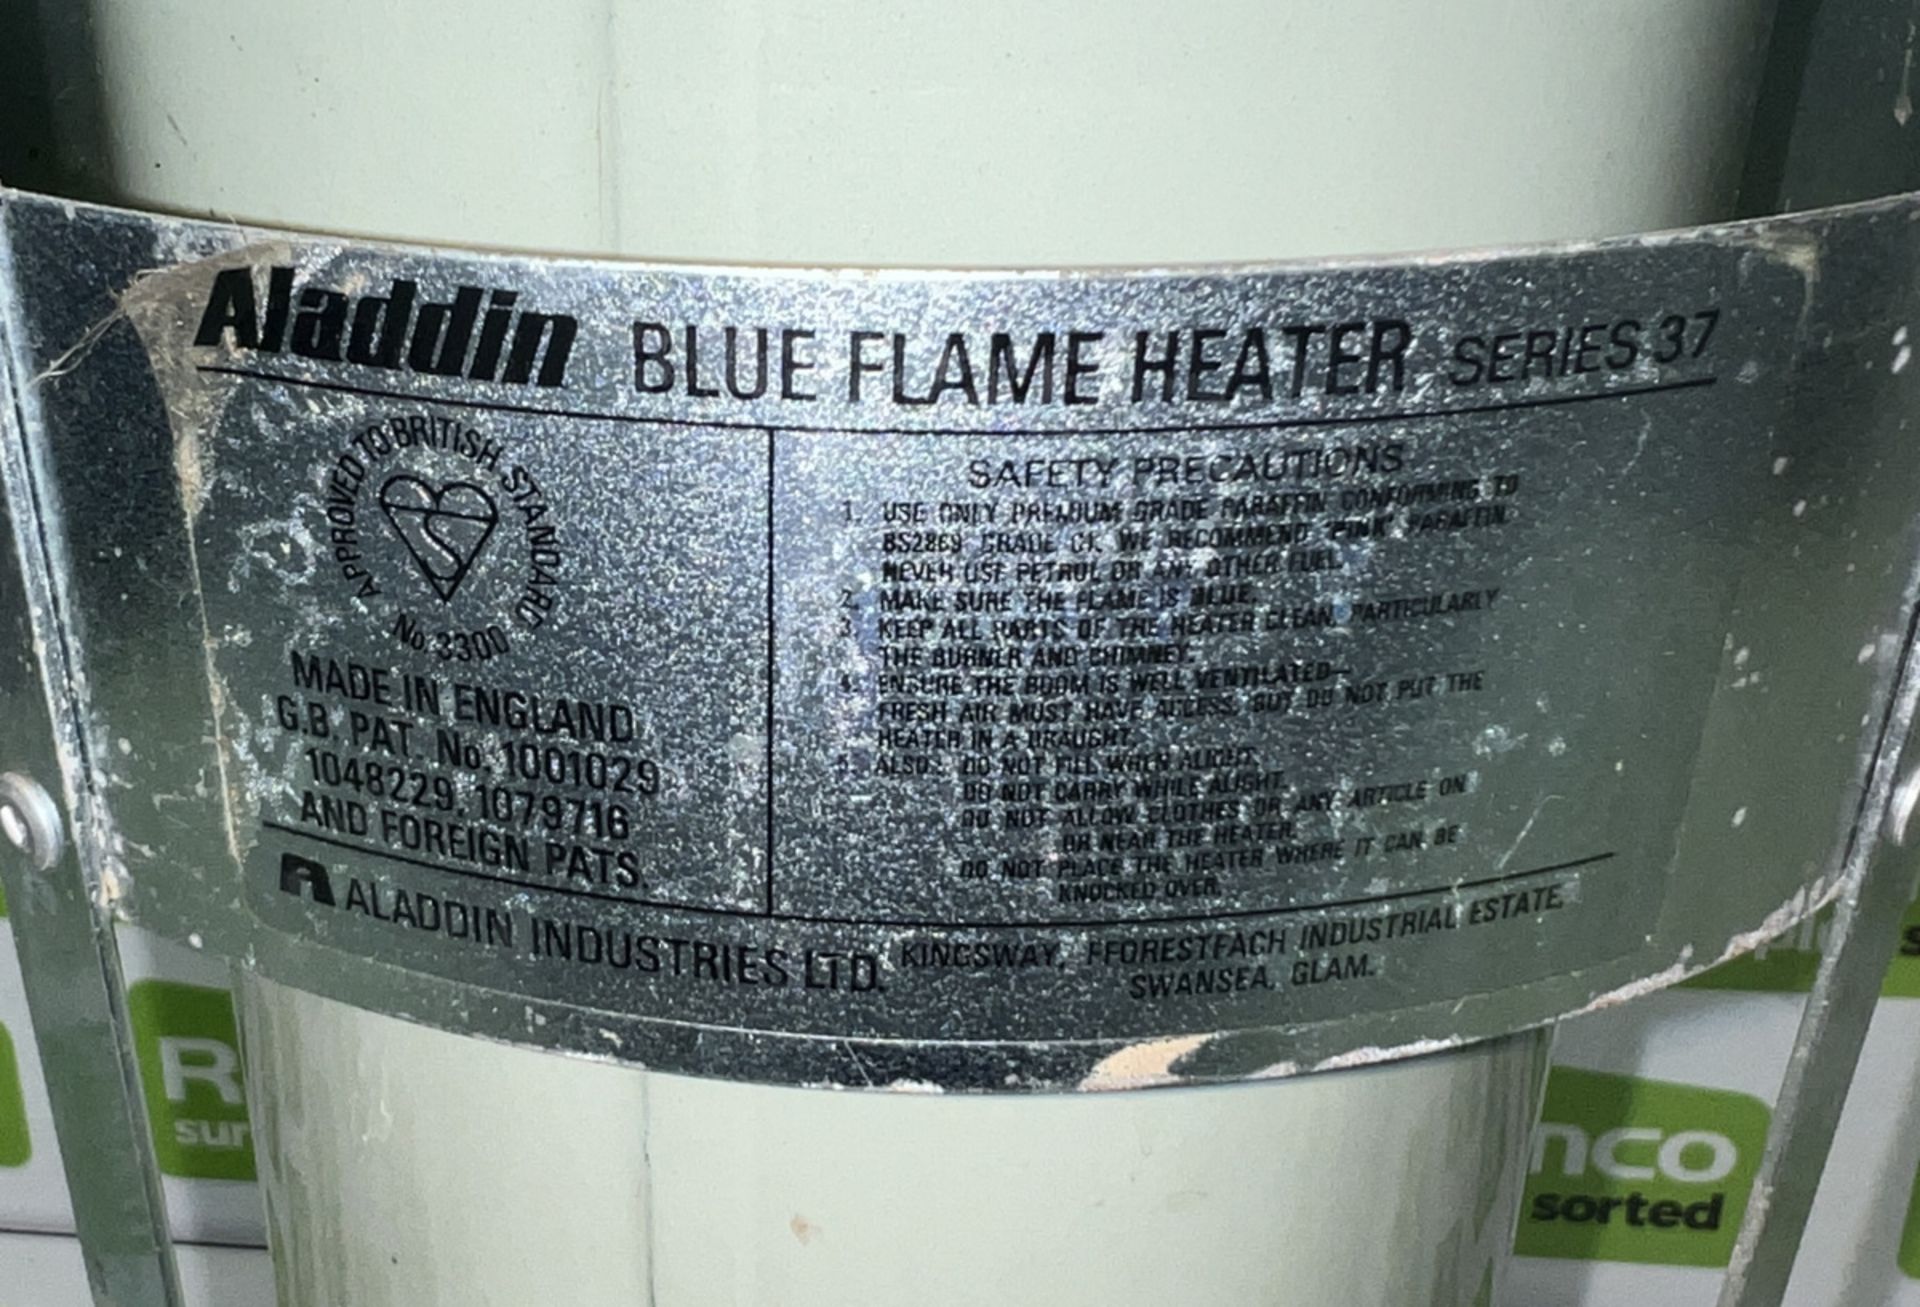 Aladdin Series 37 blue flame paraffin heater - Image 5 of 5